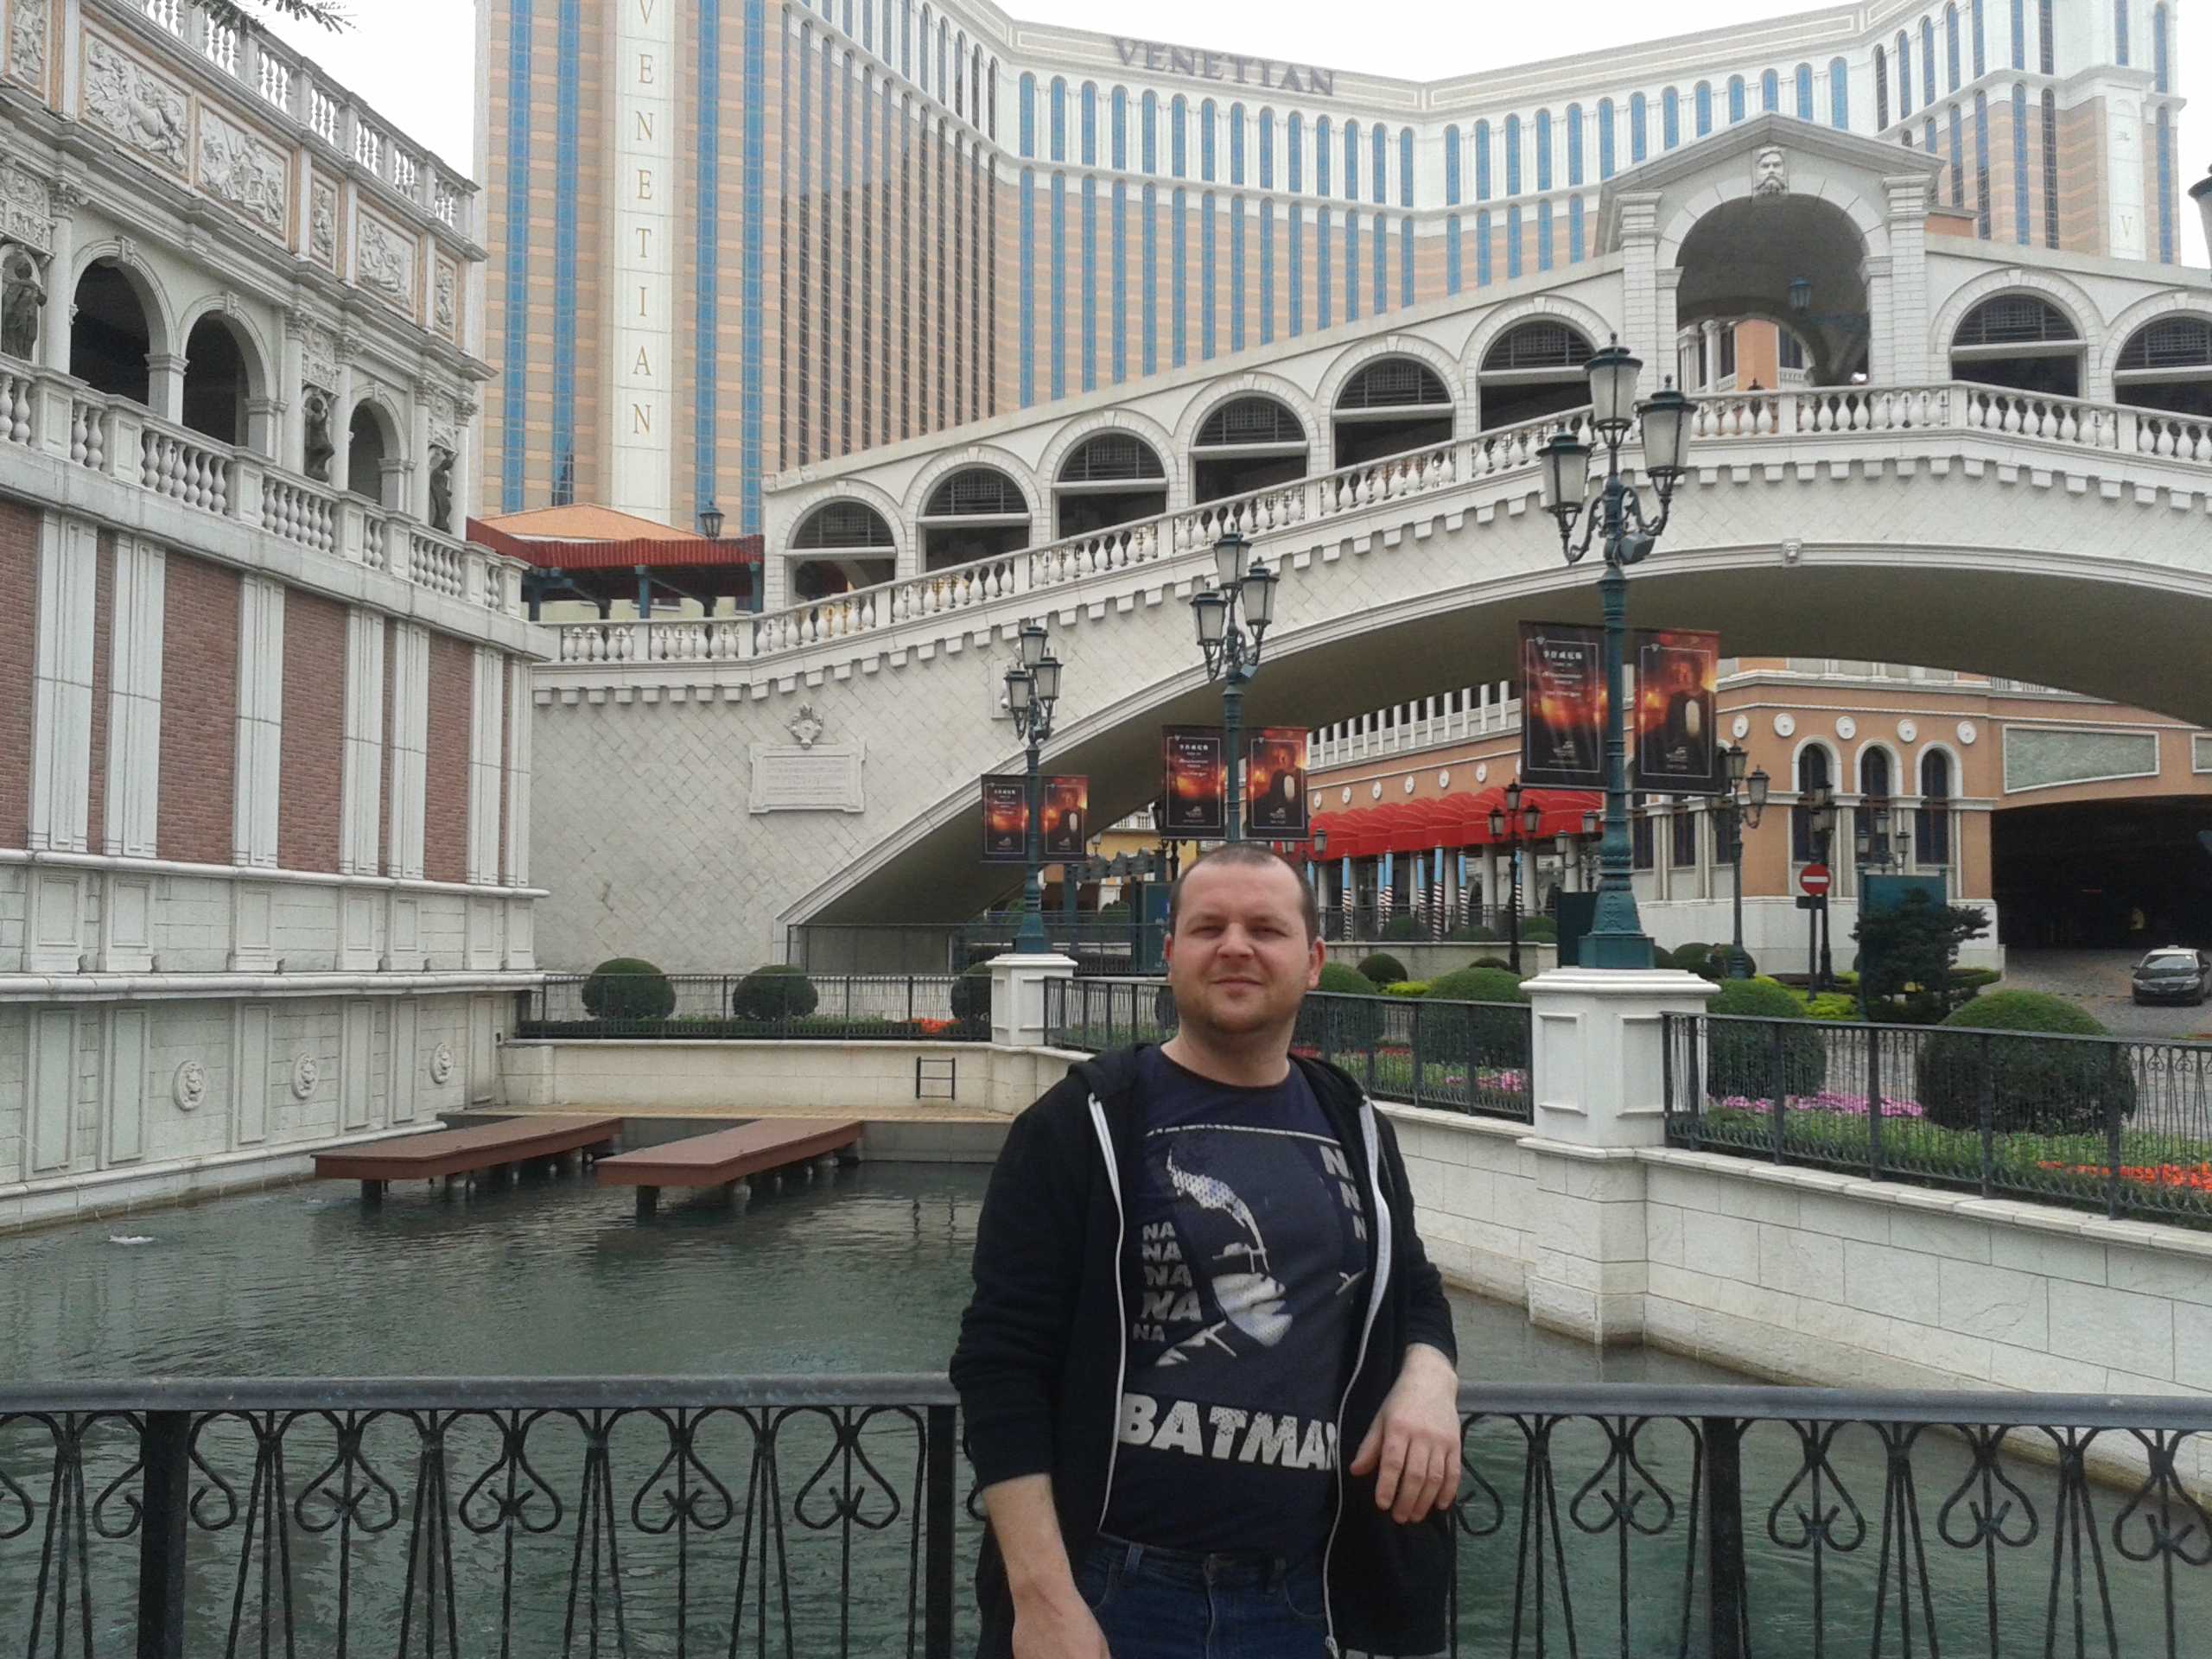 At the Venetian in Macau. Already gaining that lazy holiday fat and only been here 5 days